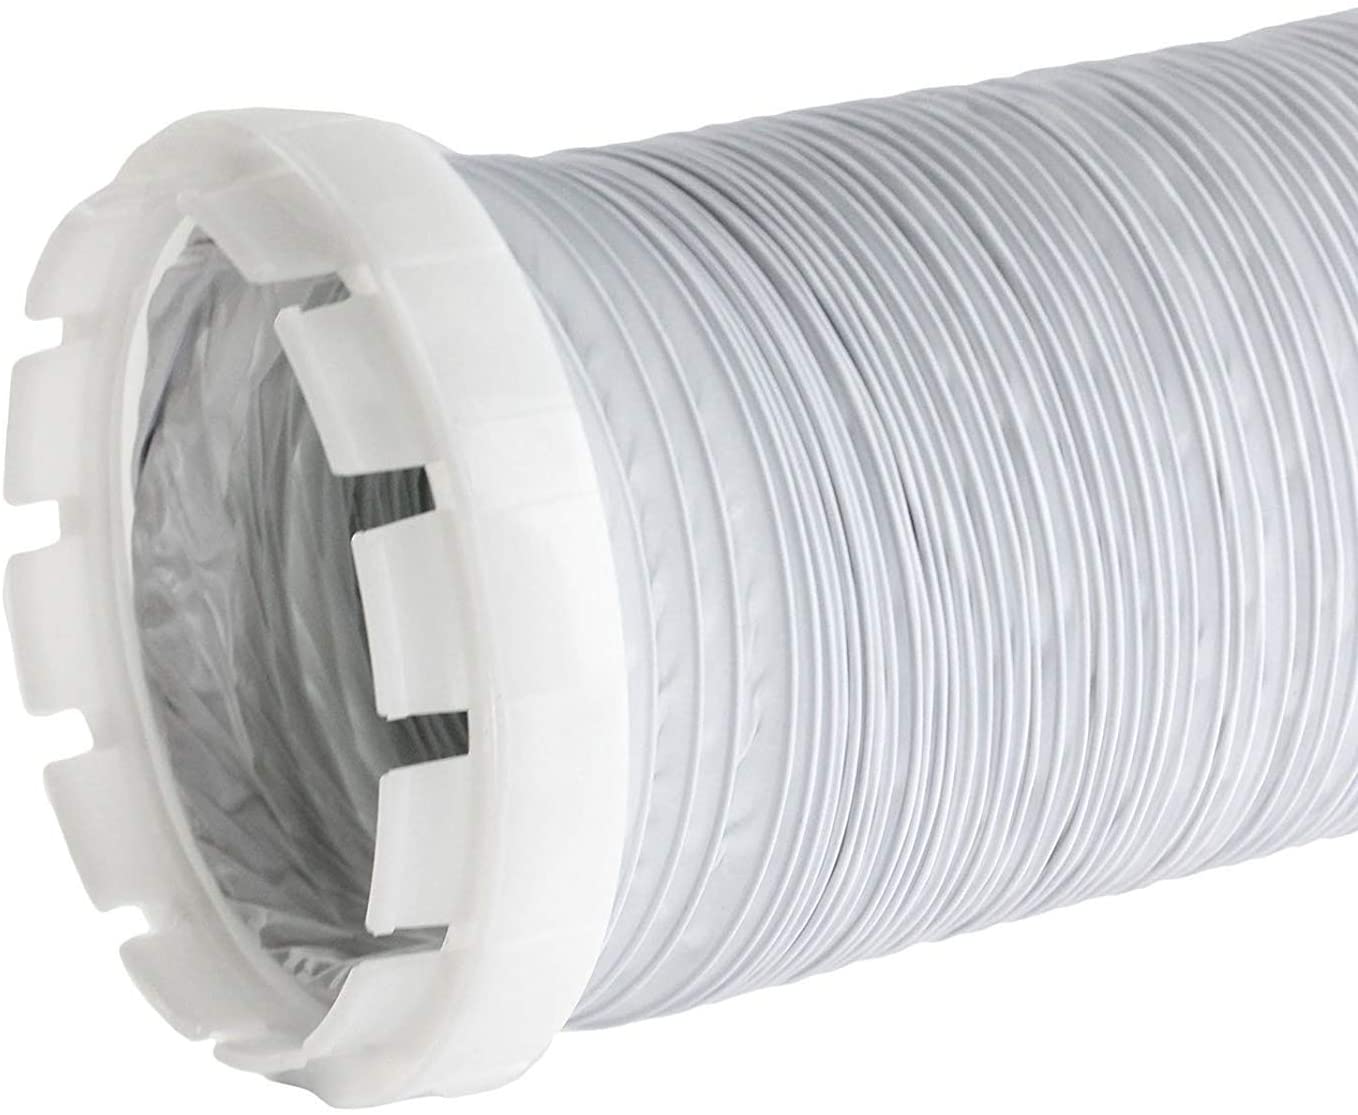 Universal 4m Vent Hose + Adapter for Tumble Dryer